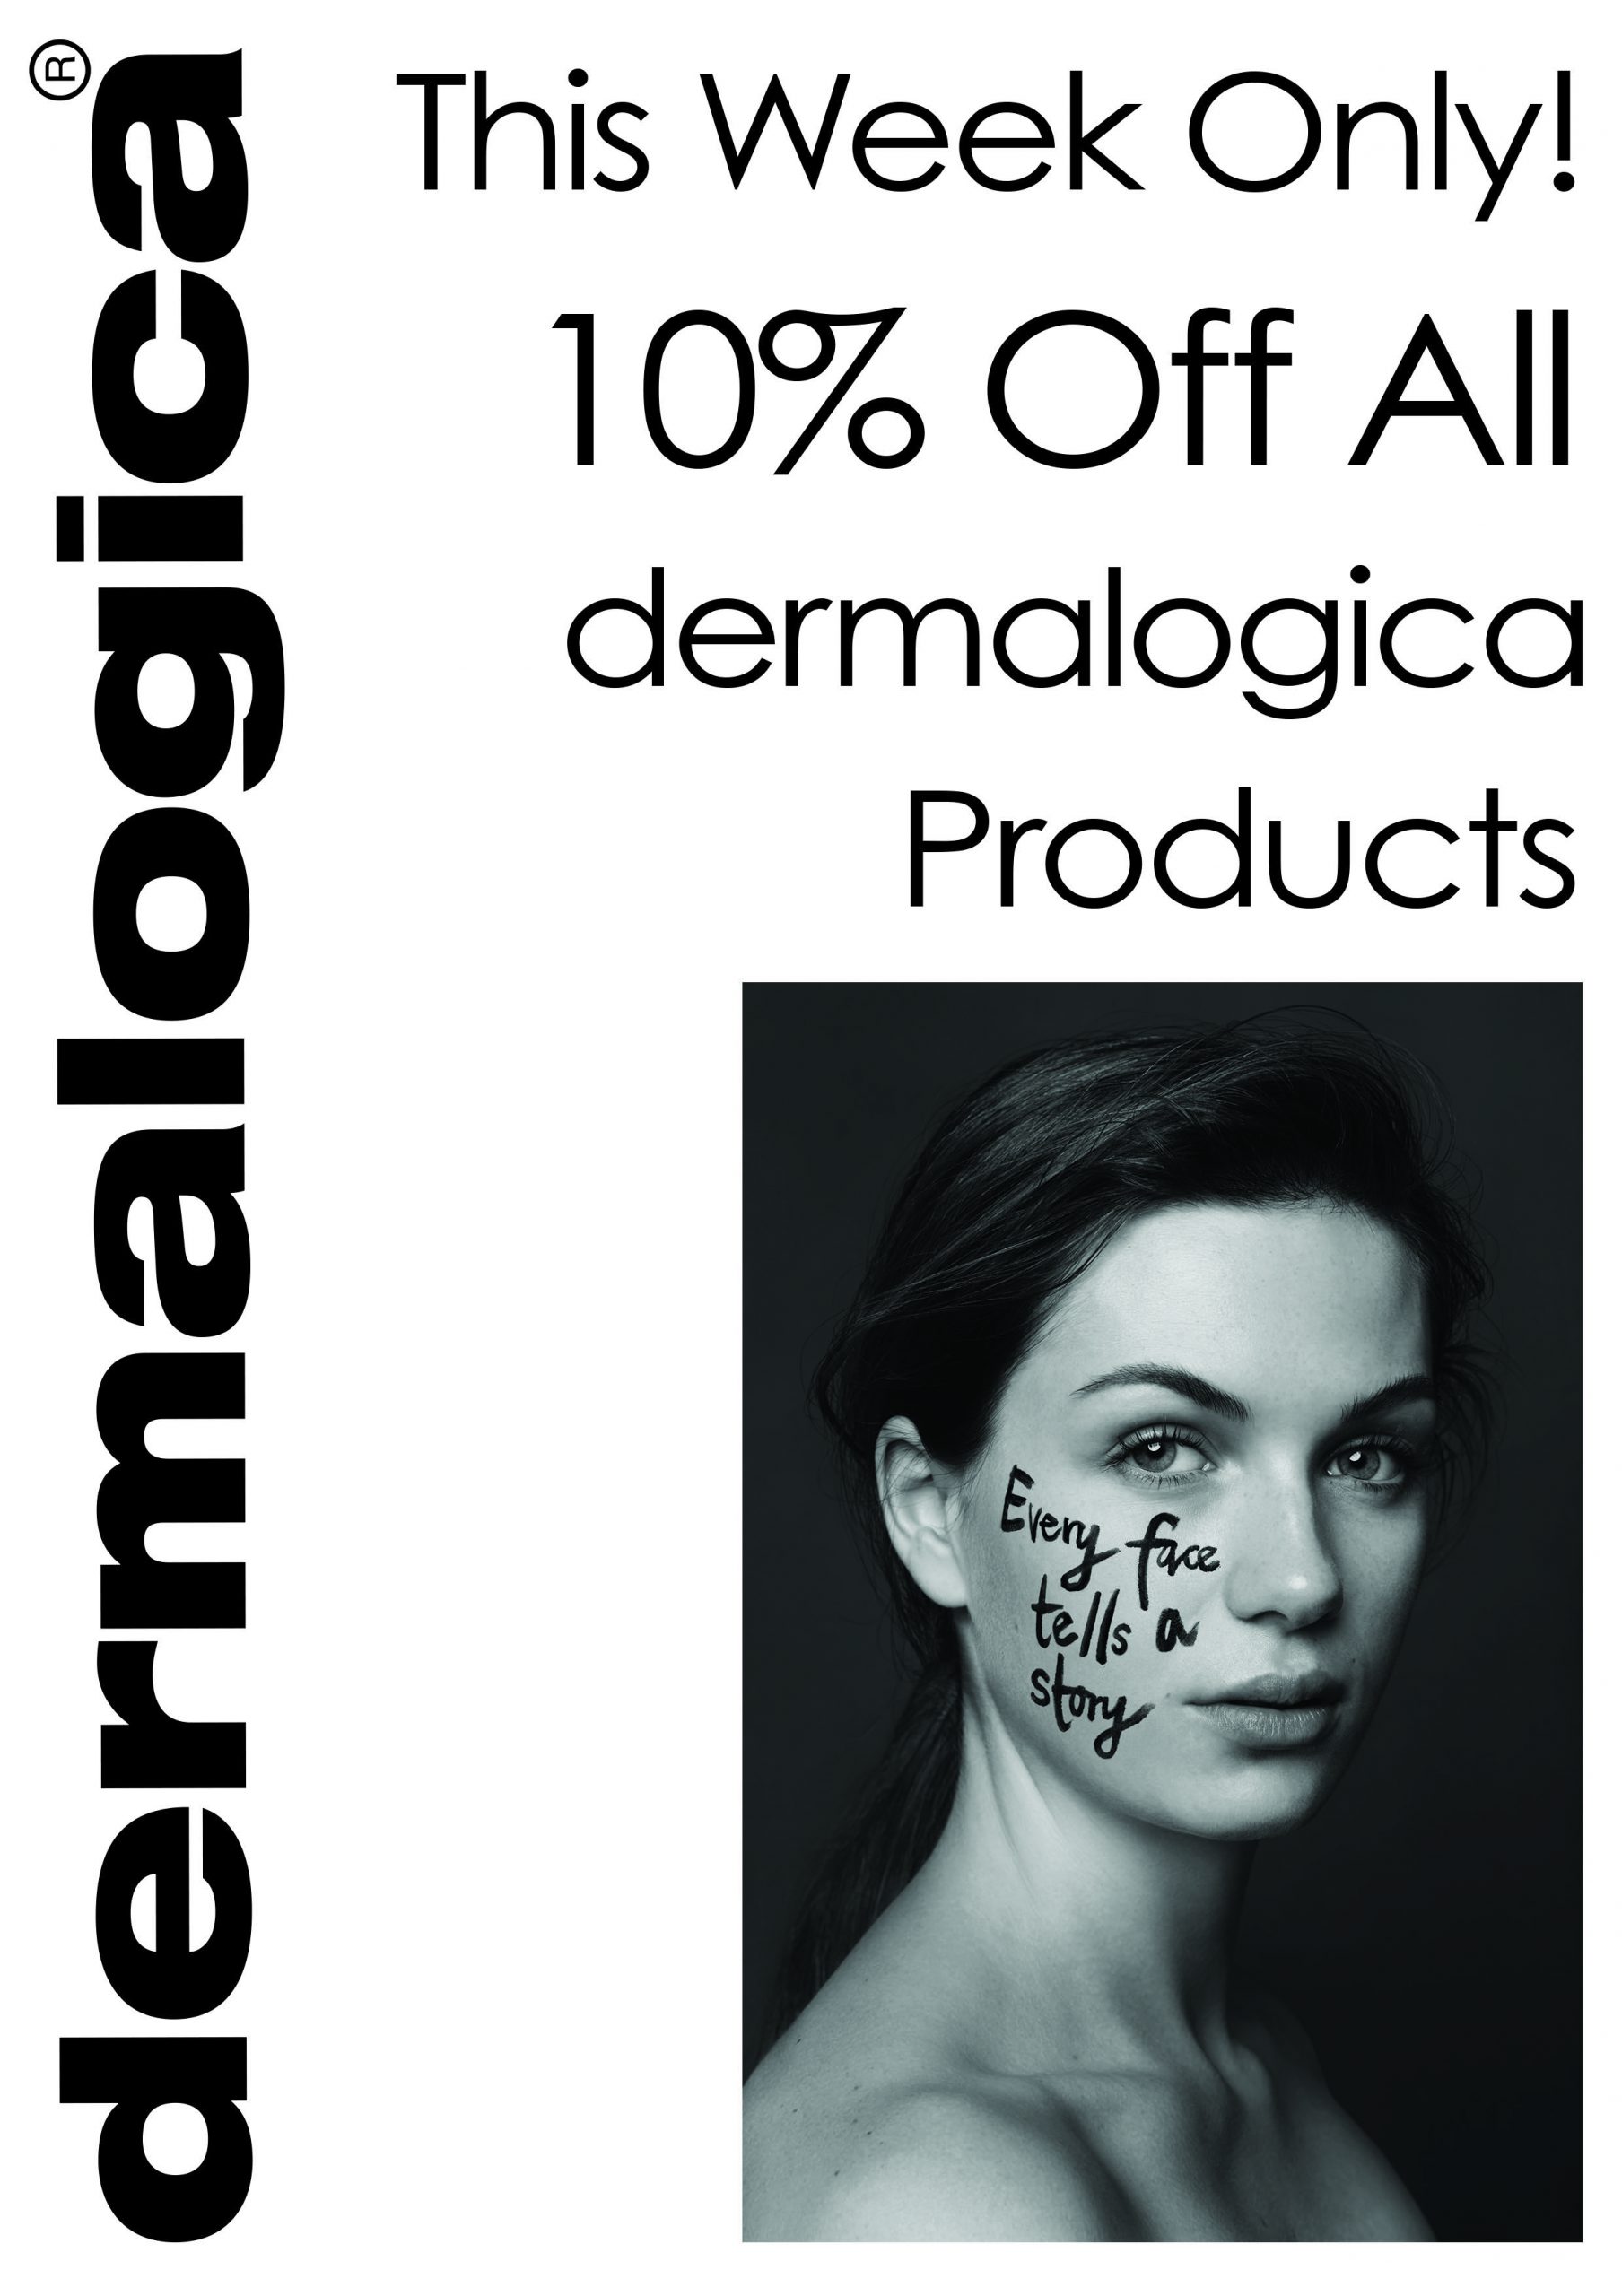 10% OFF ALL DERMALOGICA – FOR ONE WEEK ONLY